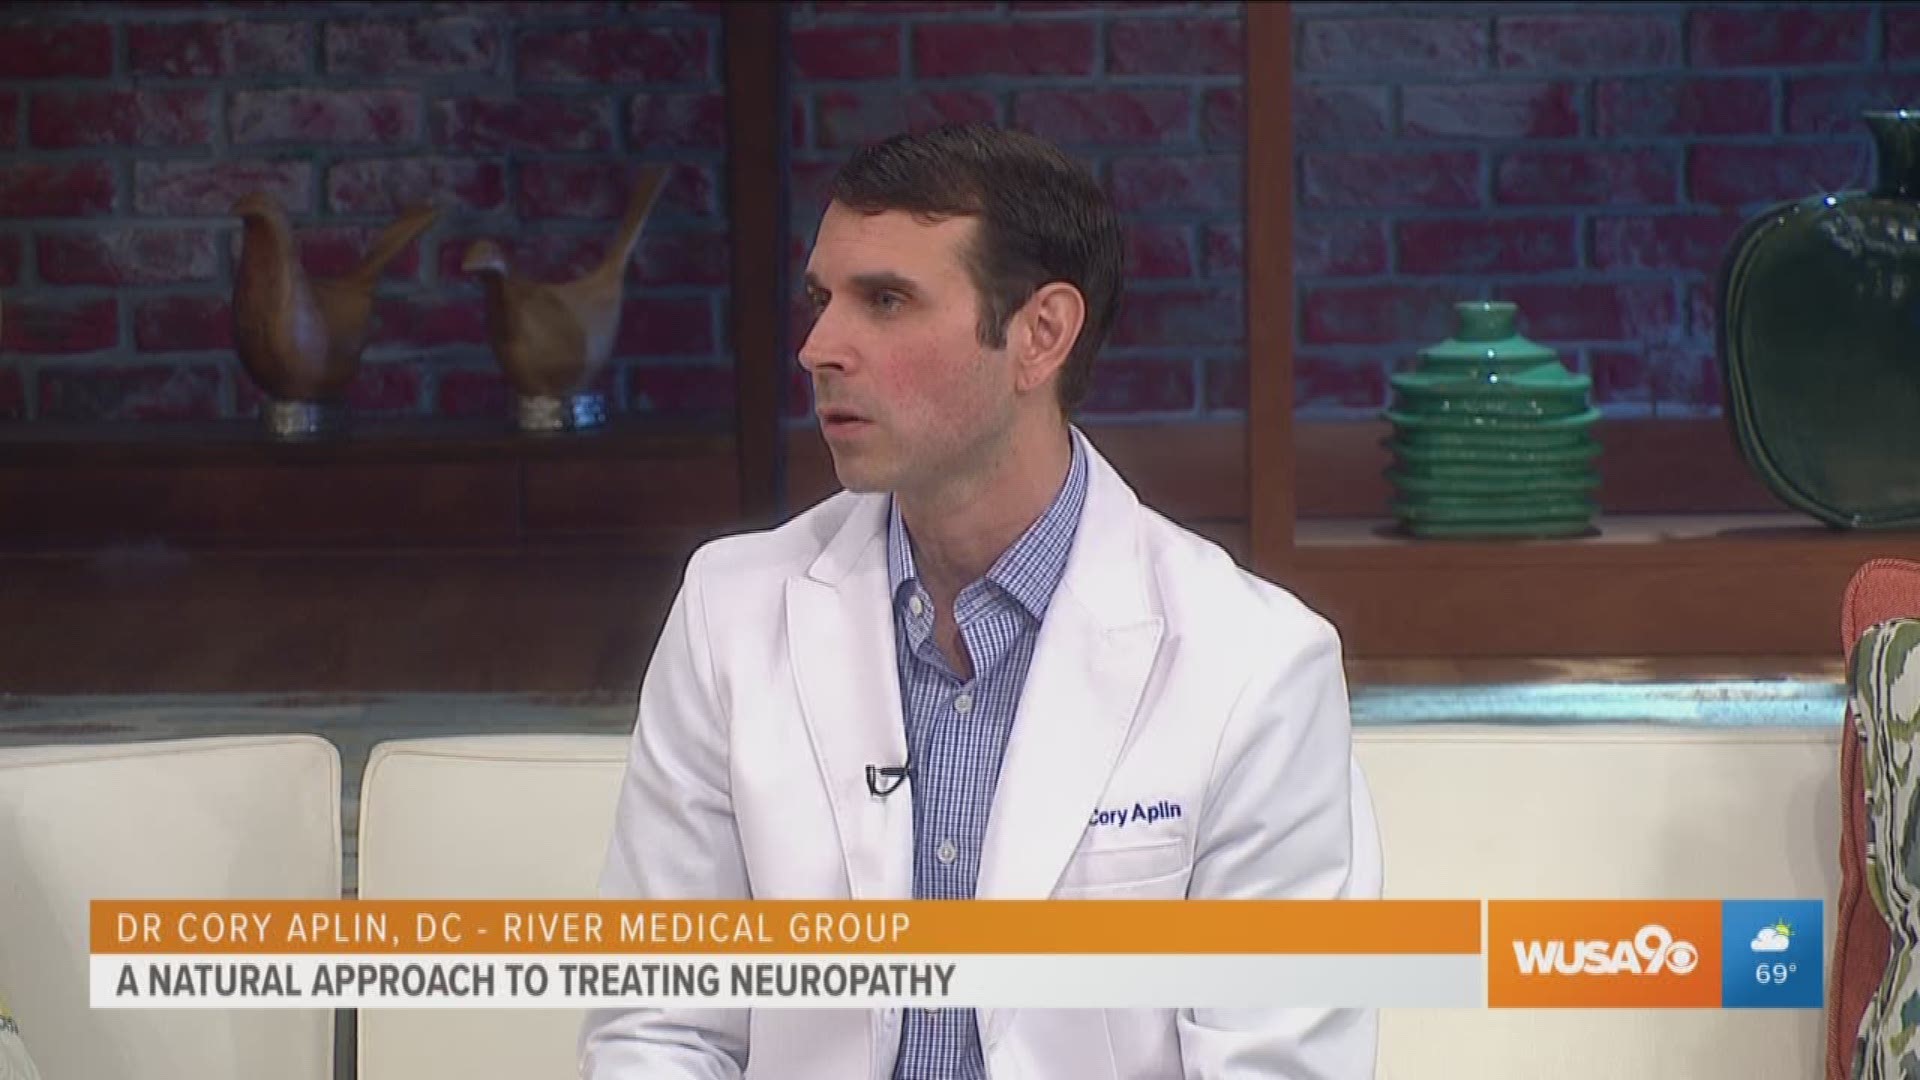 With the opioid crisis affecting many families, people are looking for more natural ways to treat certain conditions.  Dr. Cory Aplin of River Medical Group in Bethesda explains how peripheral neuropathy can be treated naturally without extra pain medications.  For more information visit RiverMedicalGroup.com or call (240) 283-4391.